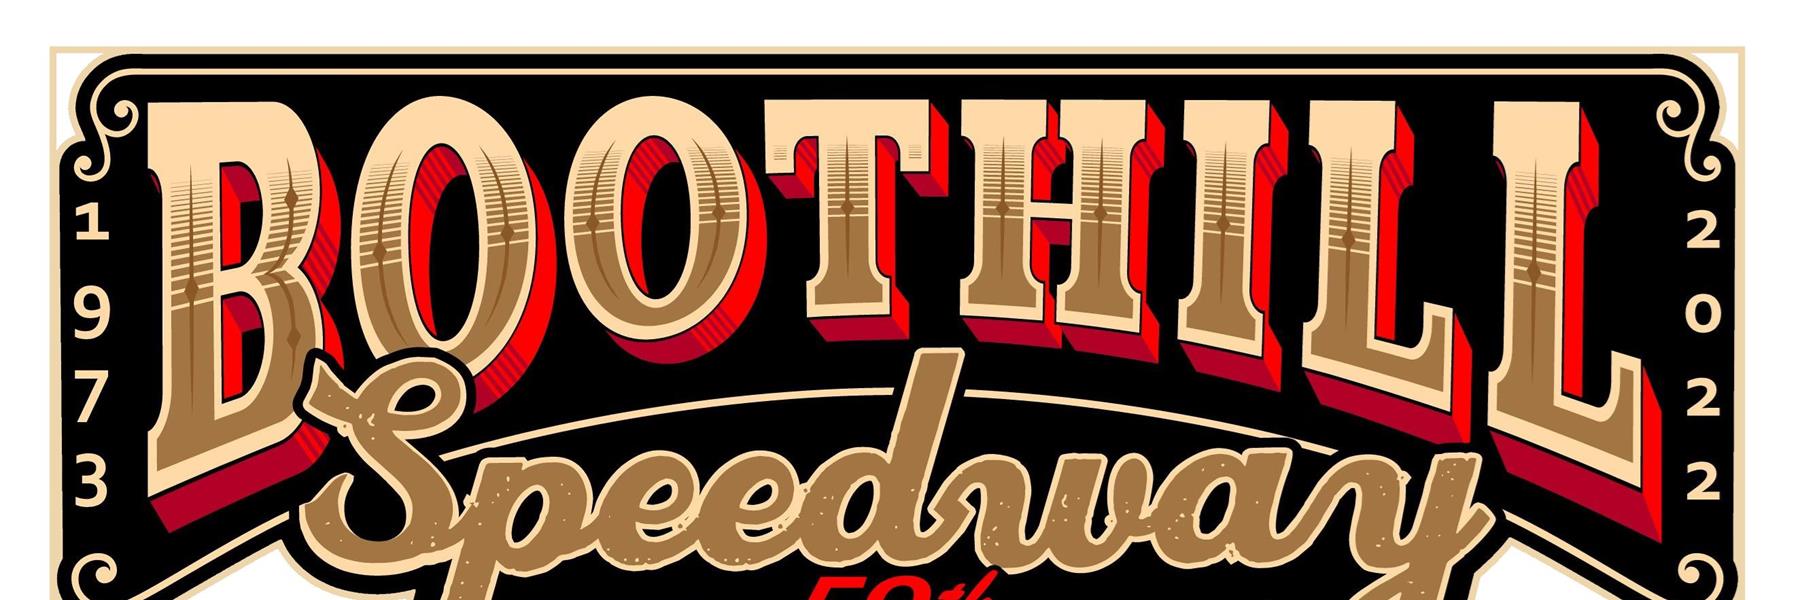 7/2/2022 - Boothill Speedway